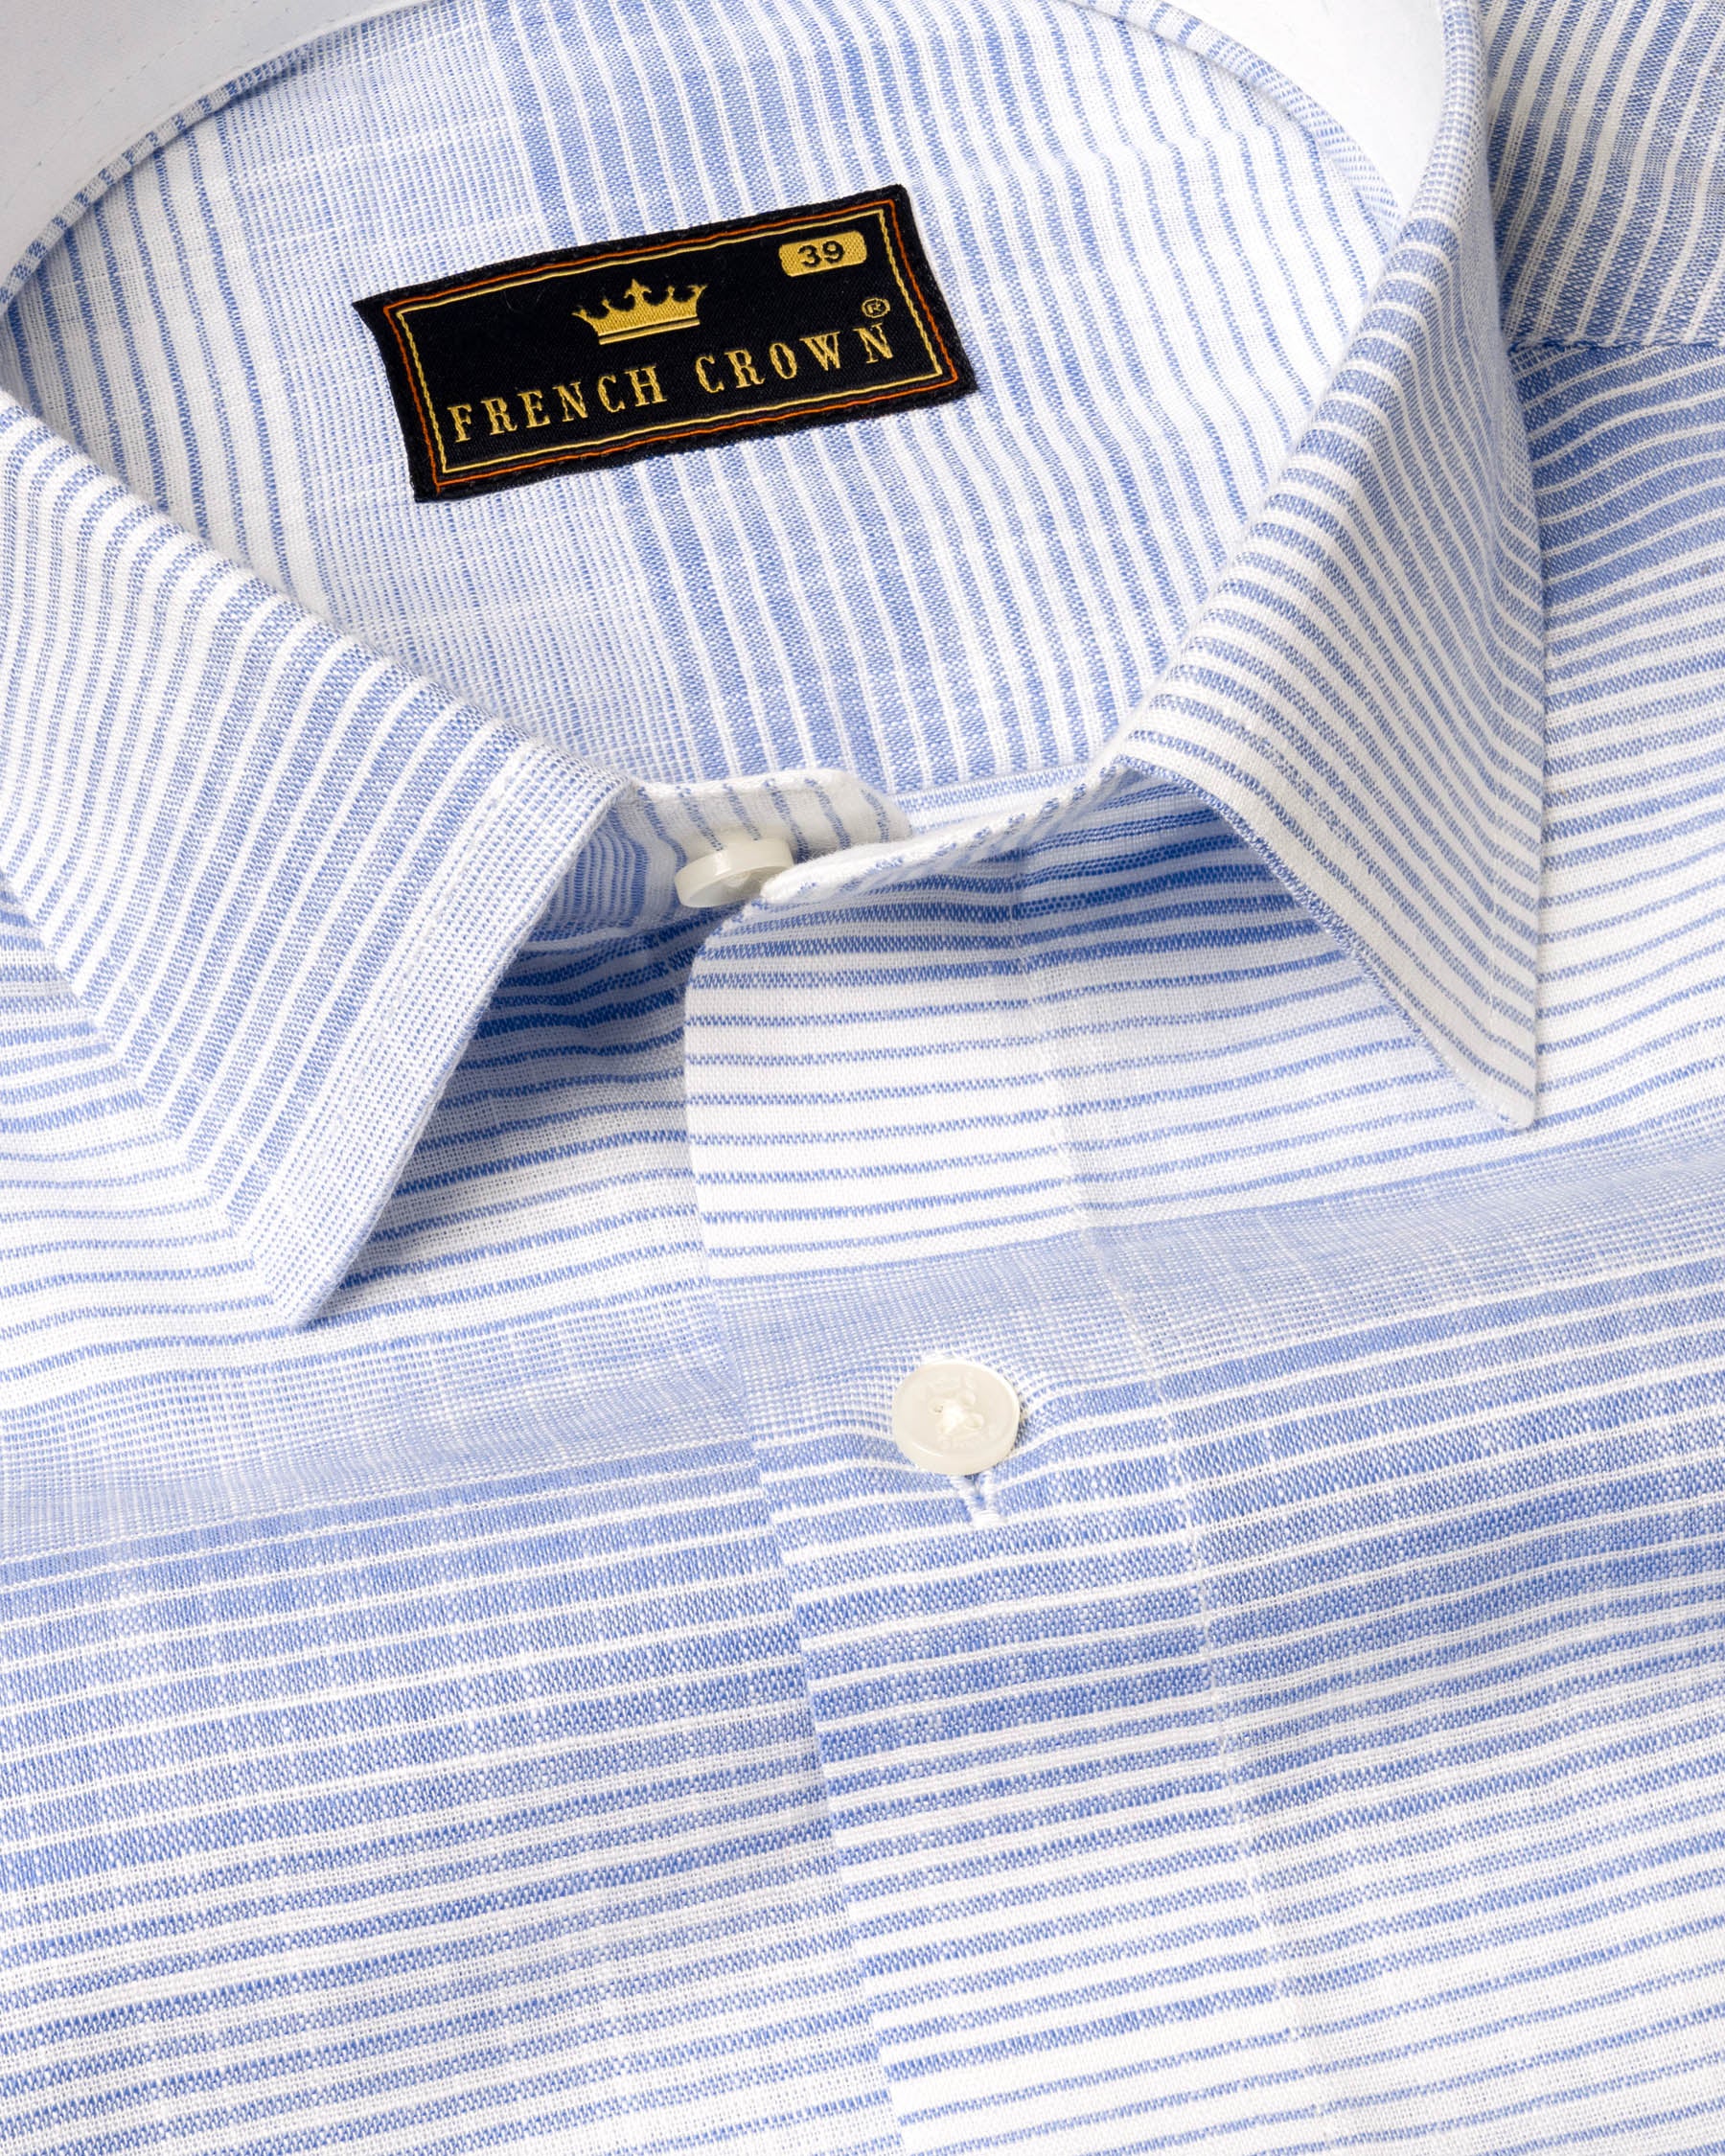 Blue Bell and White Striped Luxurious Linen Shirt 6162-CP-38, 6162-CP-H-38, 6162-CP-39, 6162-CP-H-39, 6162-CP-40, 6162-CP-H-40, 6162-CP-42, 6162-CP-H-42, 6162-CP-44, 6162-CP-H-44, 6162-CP-46, 6162-CP-H-46, 6162-CP-48, 6162-CP-H-48, 6162-CP-50, 6162-CP-H-50, 6162-CP-52, 6162-CP-H-52